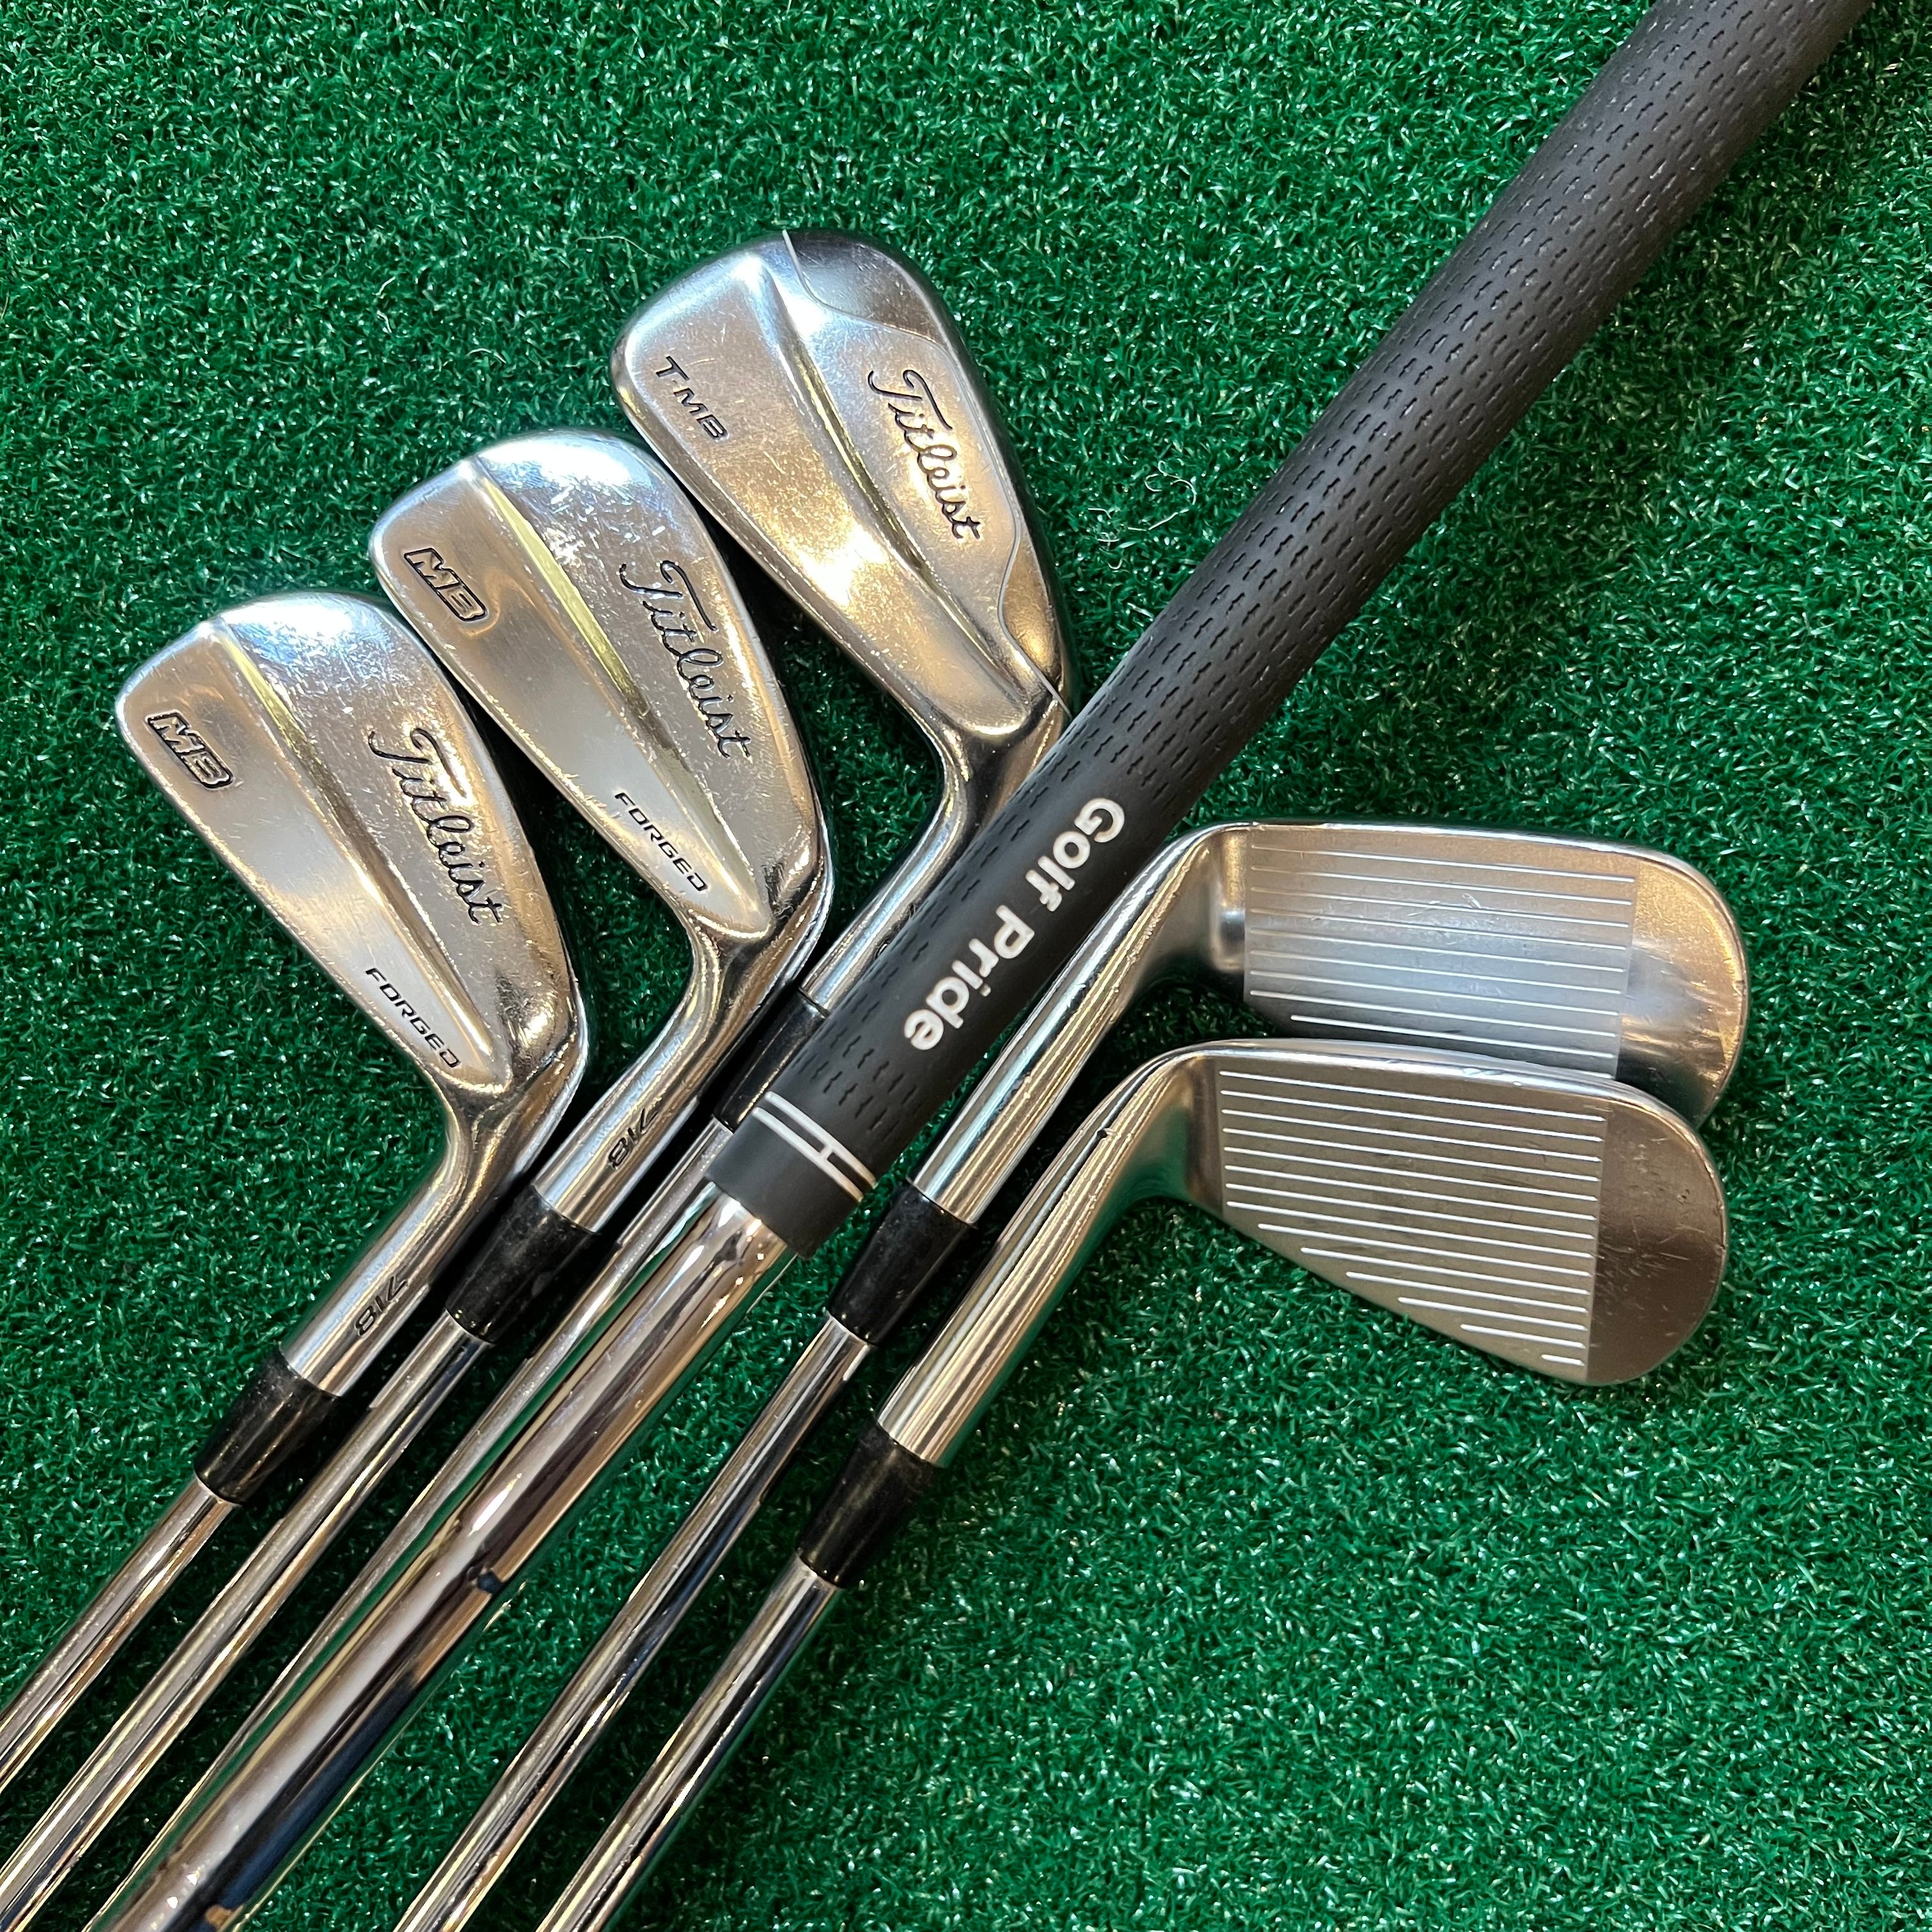 TITLEIST 718 TMB/MB COMBO SET / 5-PW / DYNAMIC GOLD TOUR ISSUE X100 SHAFTS